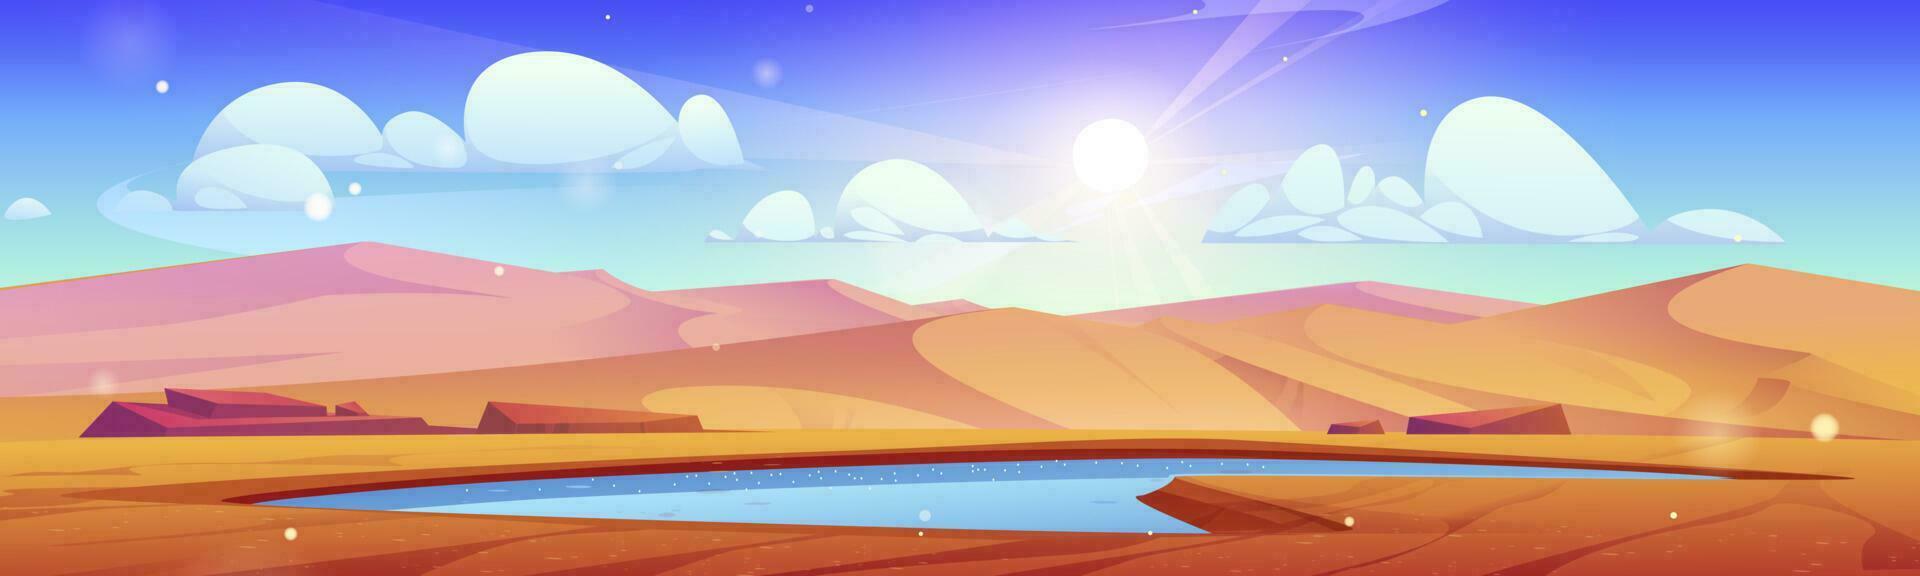 Desert landscape with lake water, empty oasis pond vector